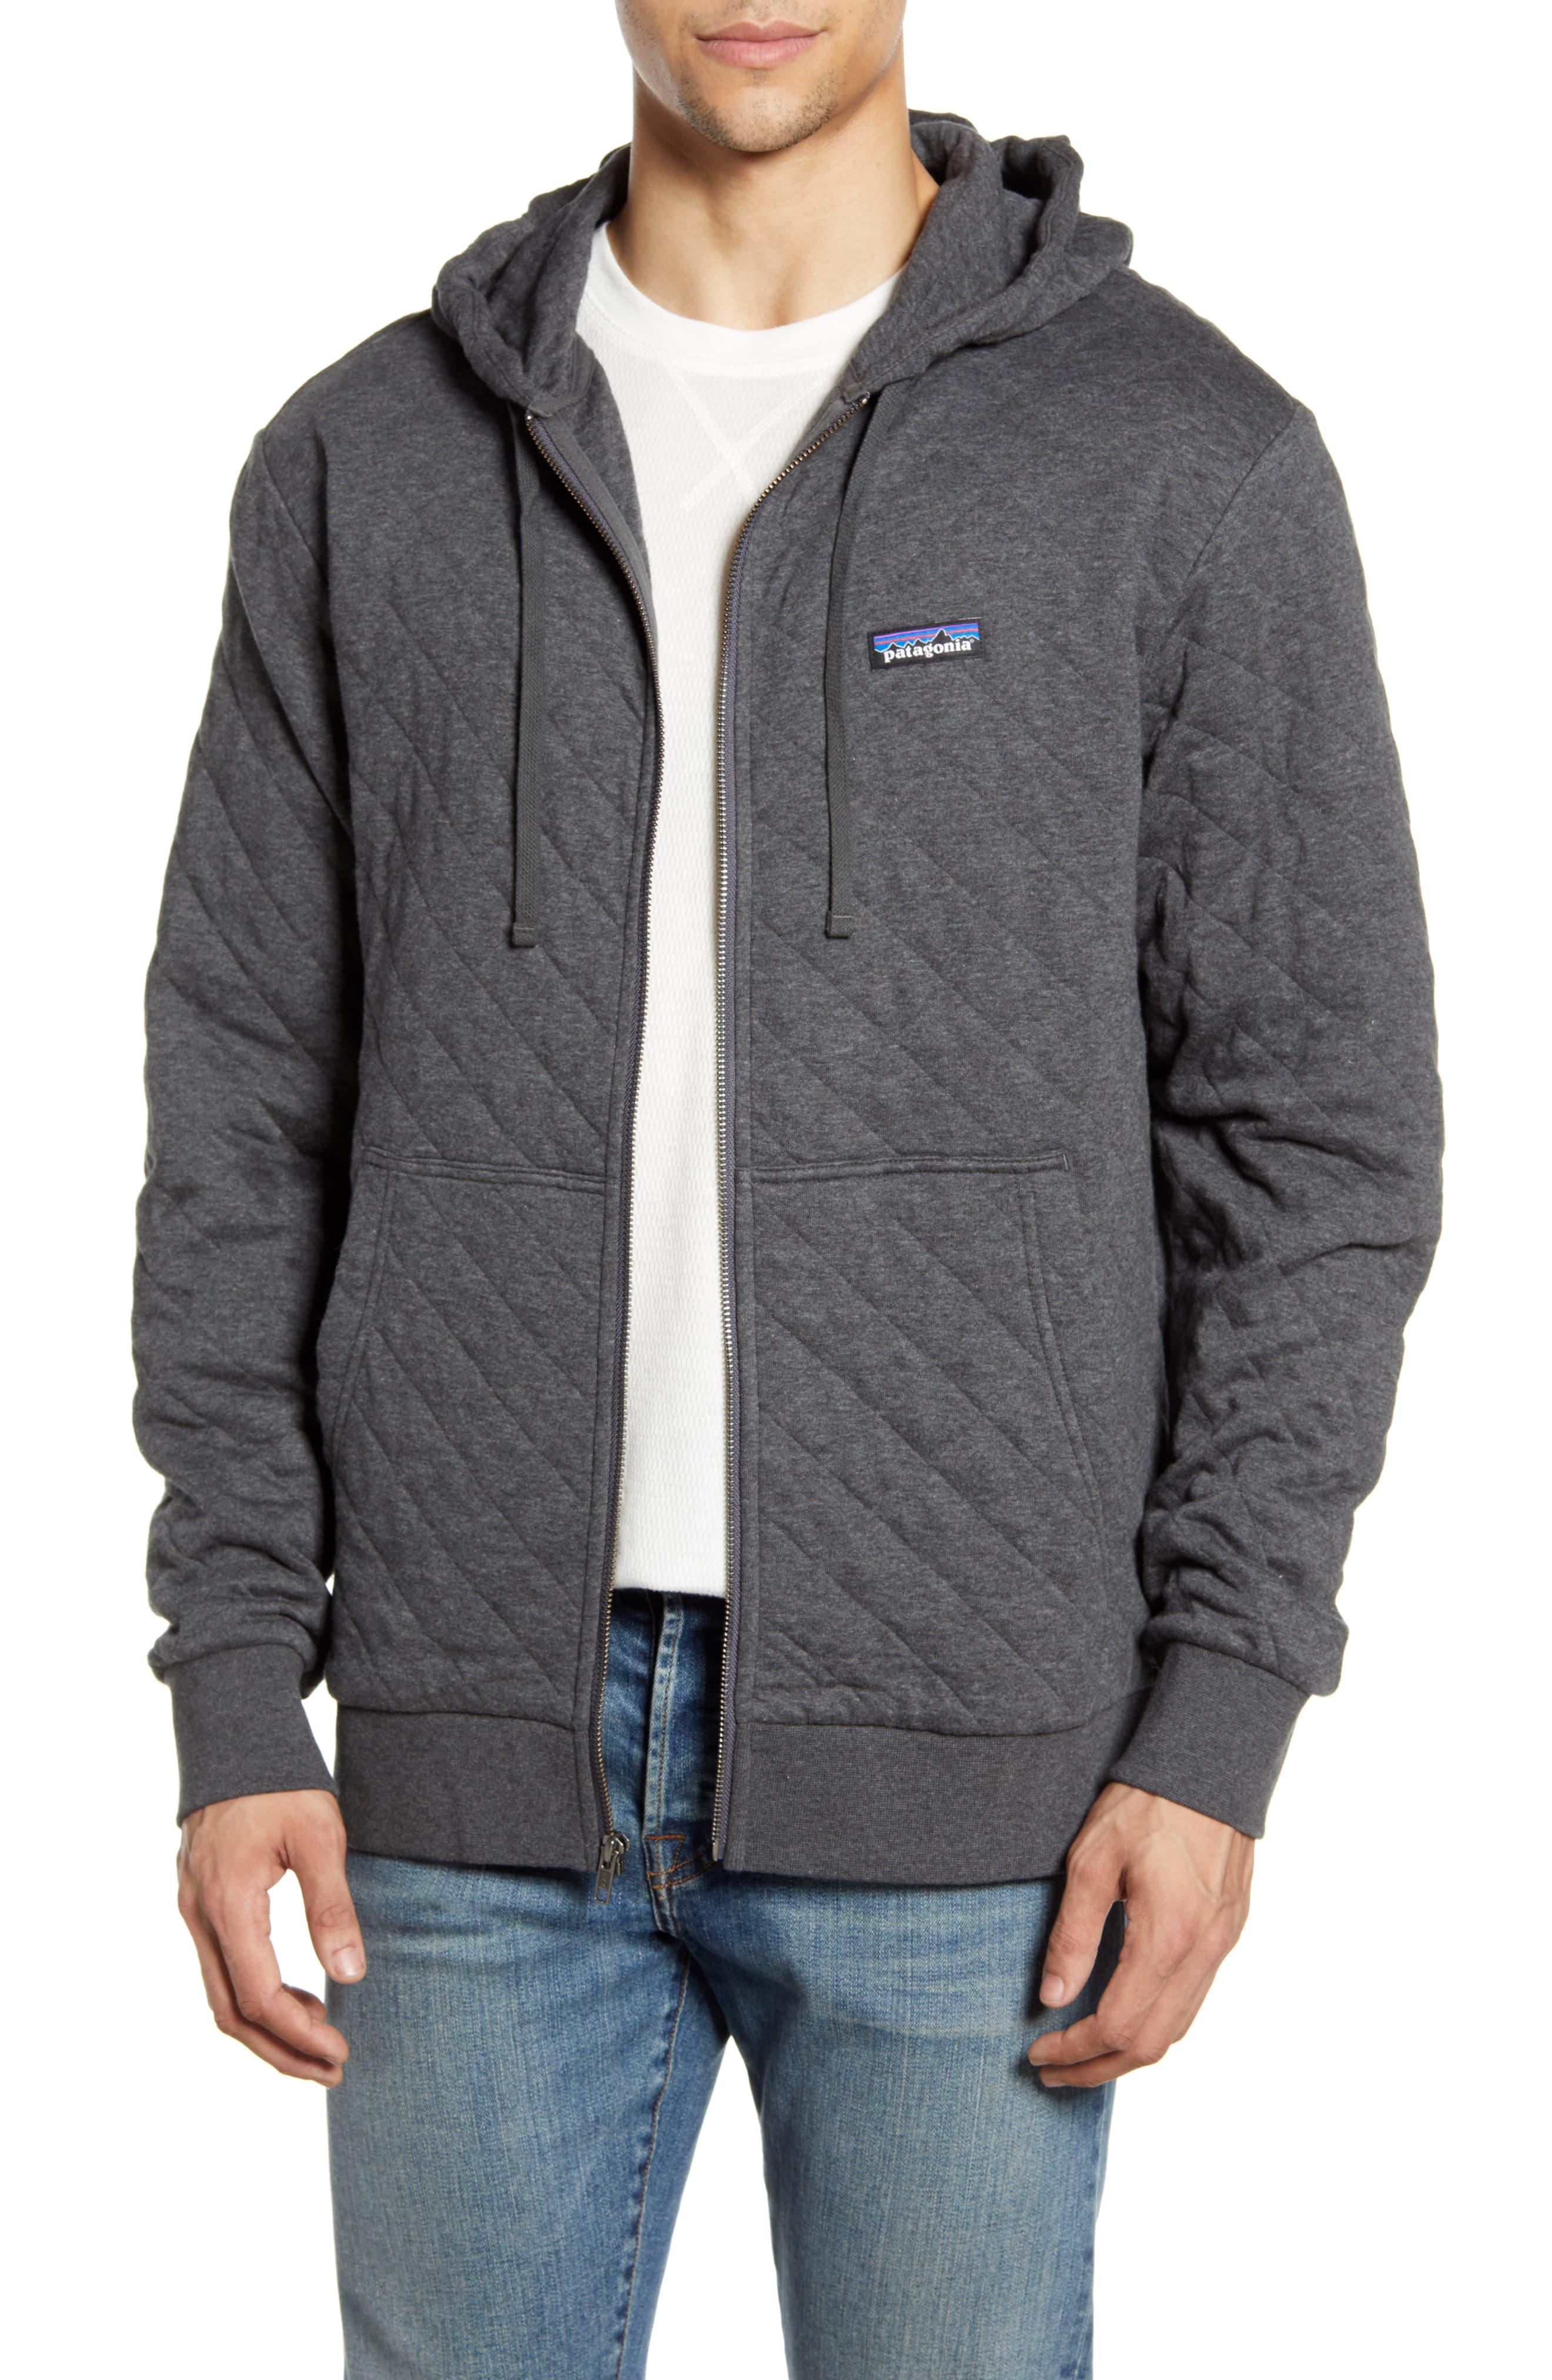 Patagonia Cotton Quilted Zip Hoodie in Gray for Men - Lyst